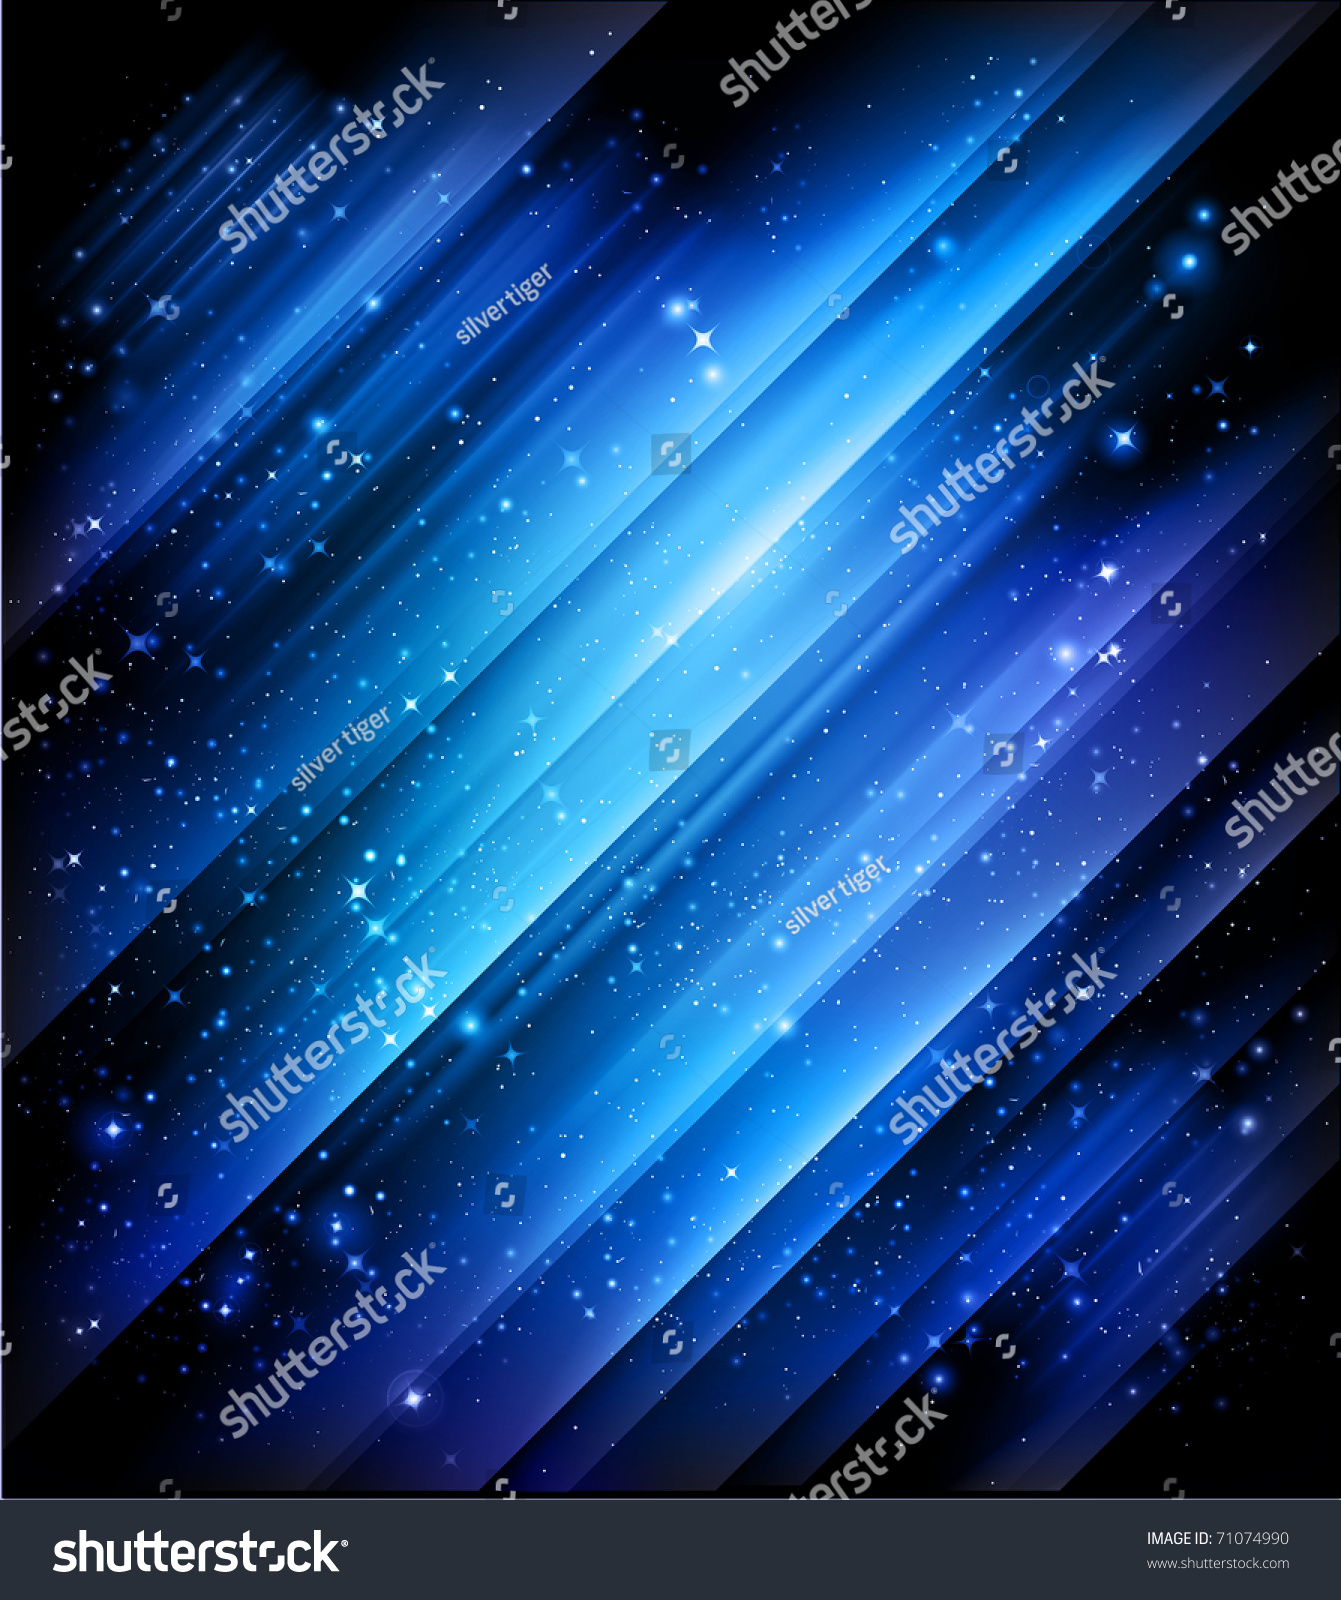 Blue Abstract Background For Your Design - Jpg Version Stock Photo ...